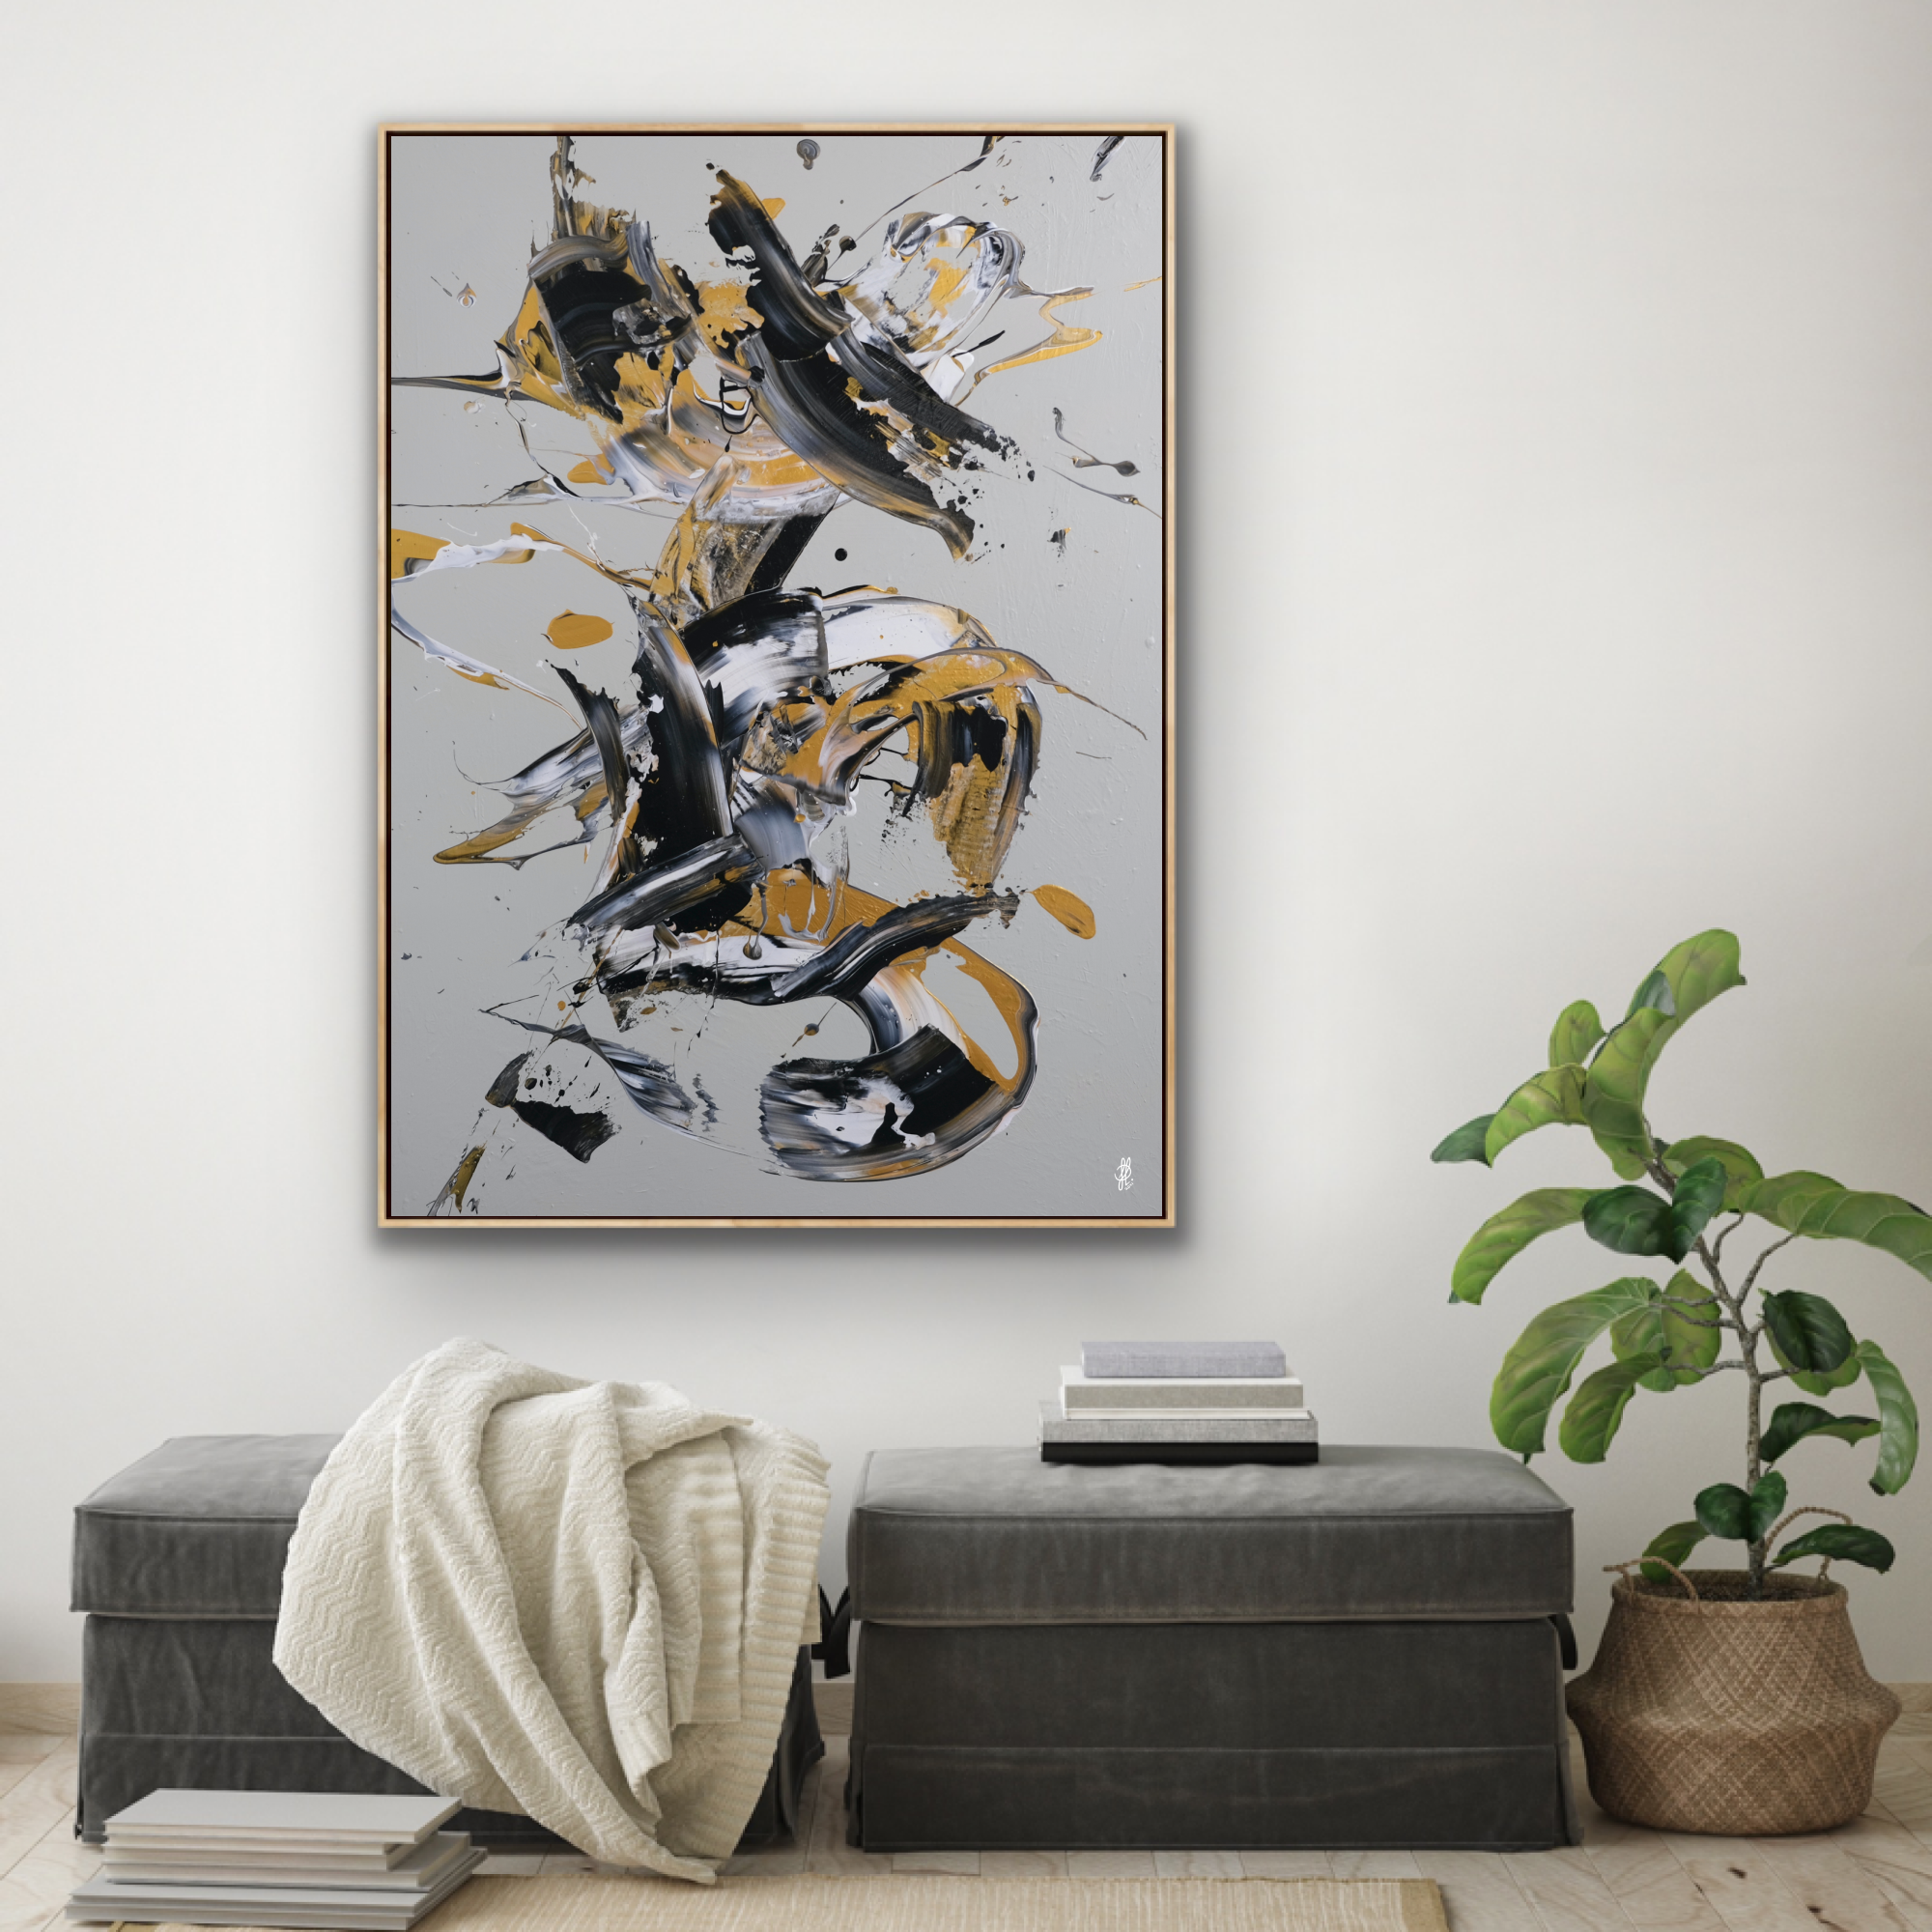 Canvas Print: "Less Is More #29"